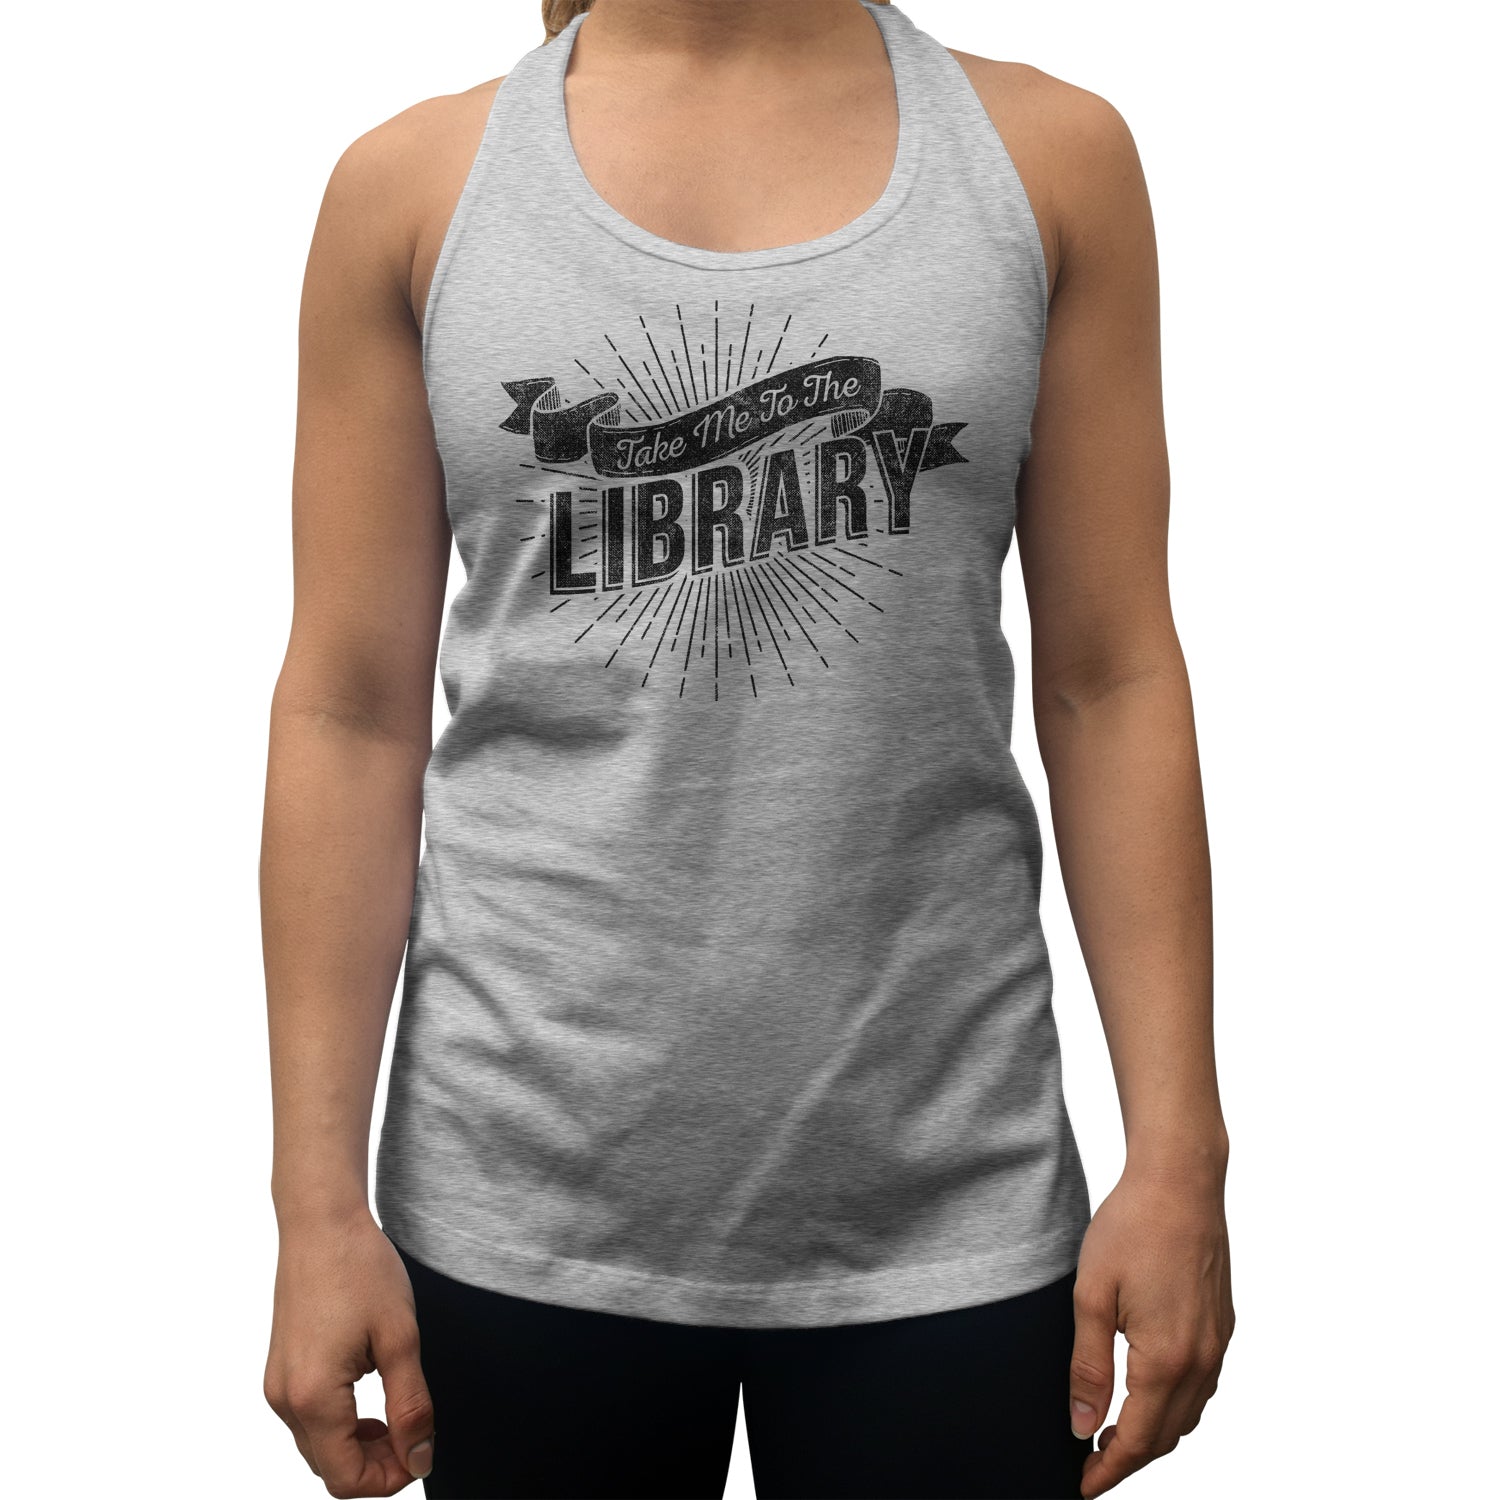 Women's Take Me To The Library Racerback Tank Top